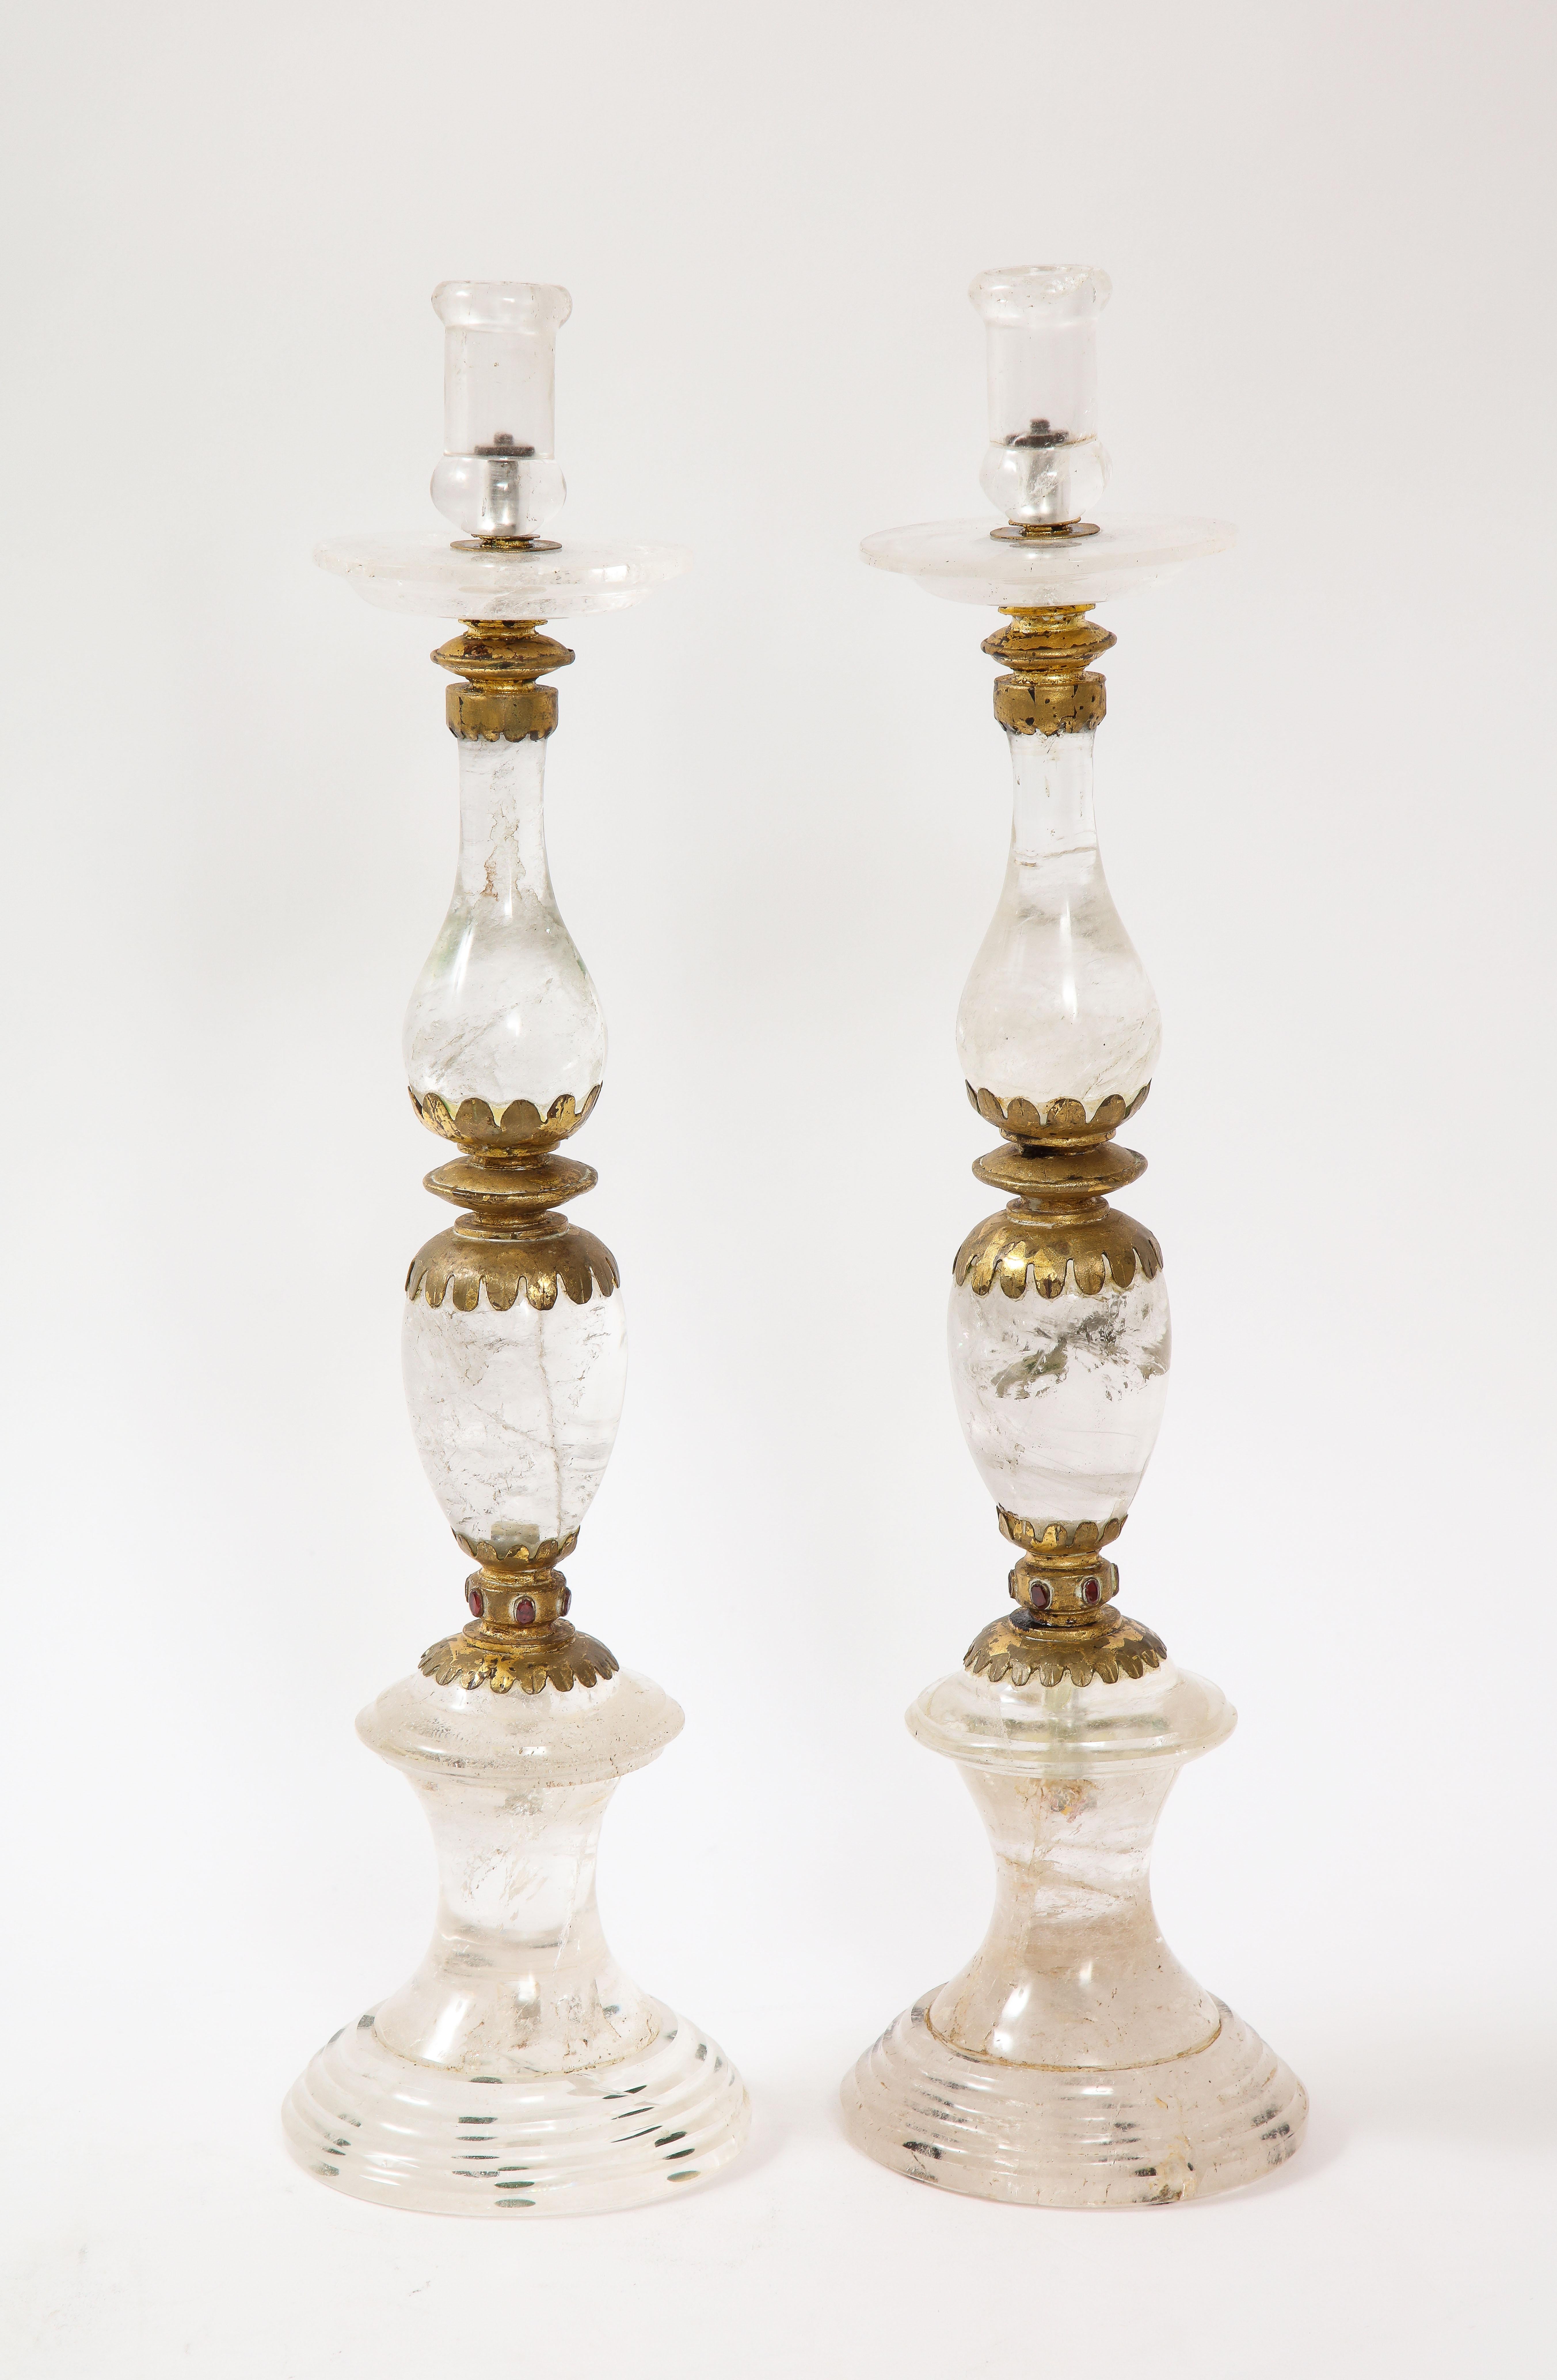 Inlay Fine Pair of Jeweled French Art Deco Rock Crystal Candlesticks Att. to 